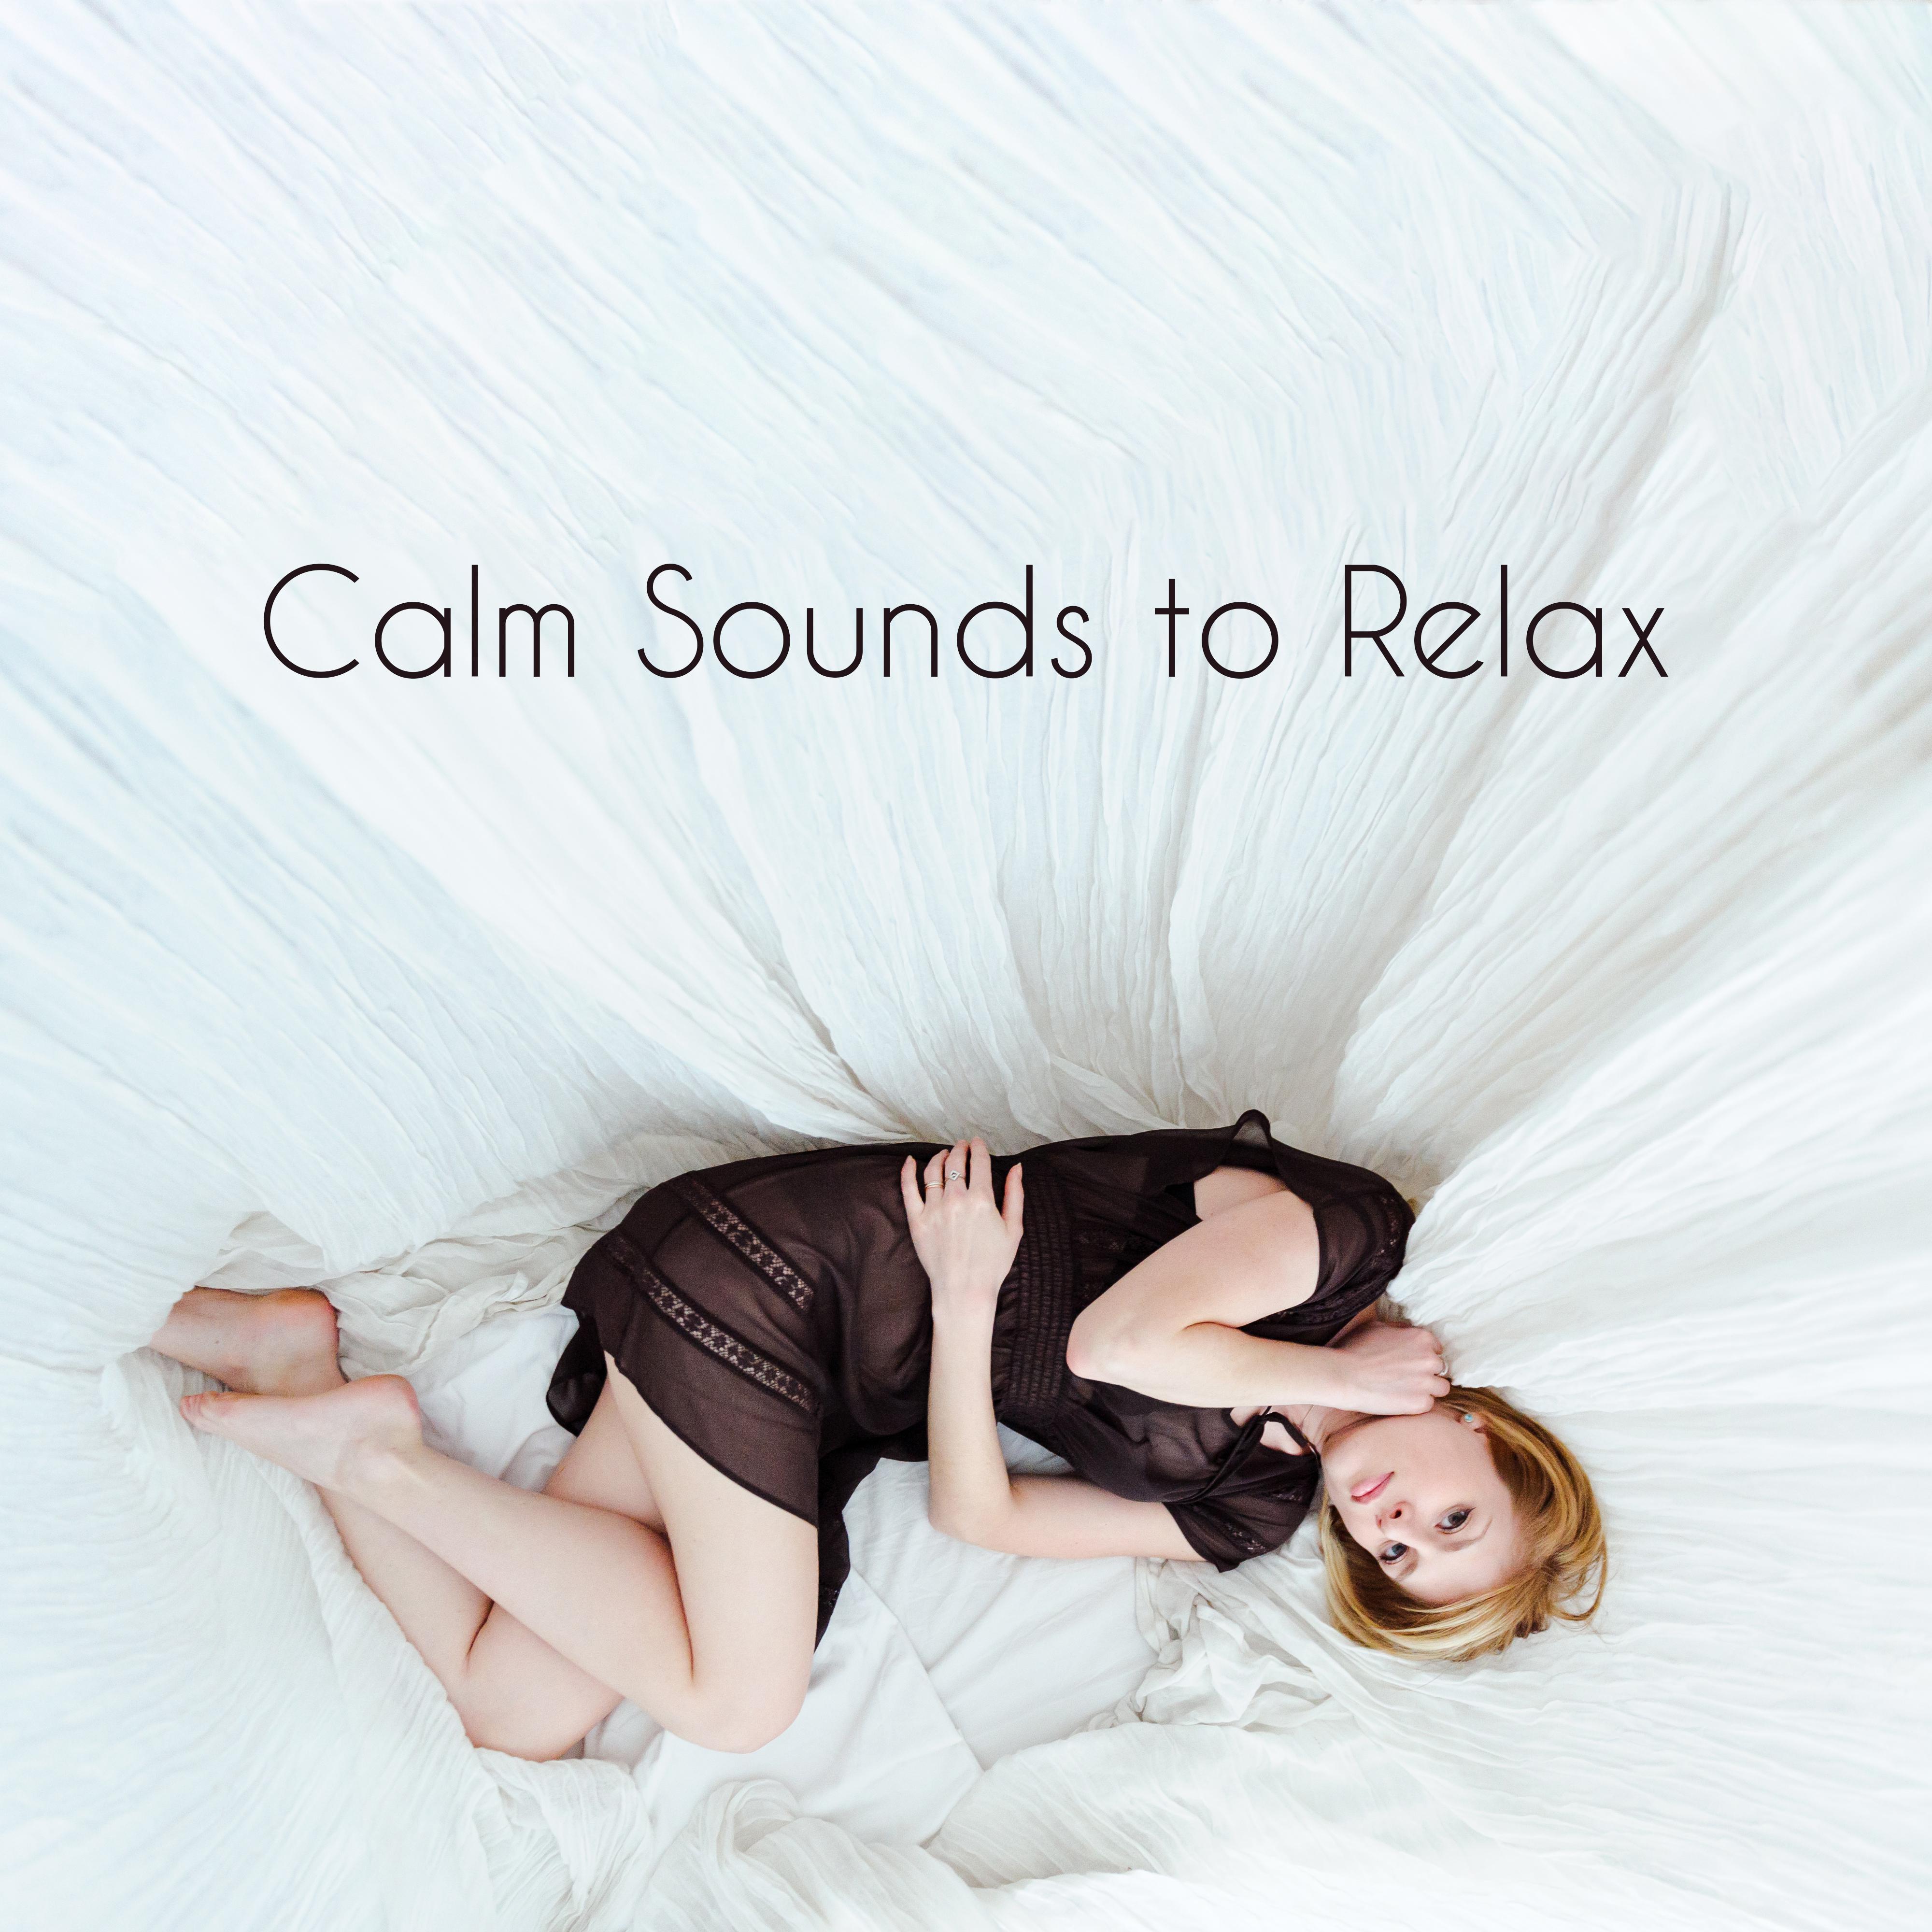 Calm Sounds to Relax